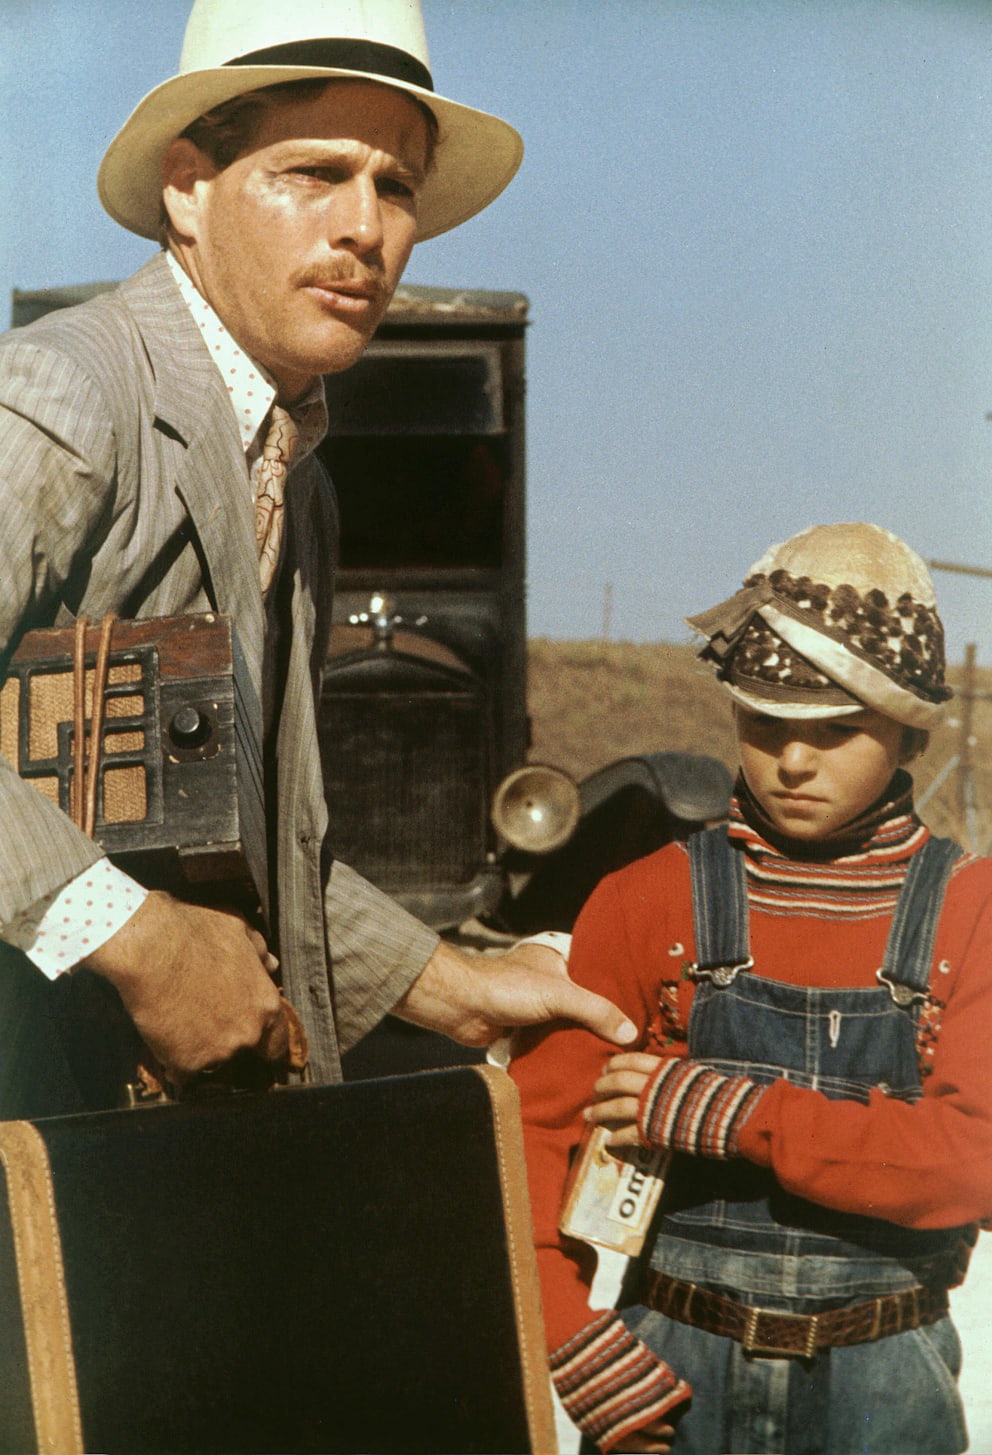 The actor with his daughter Tatum in the film “Paper Moon” (1973), a tragicomic road movie